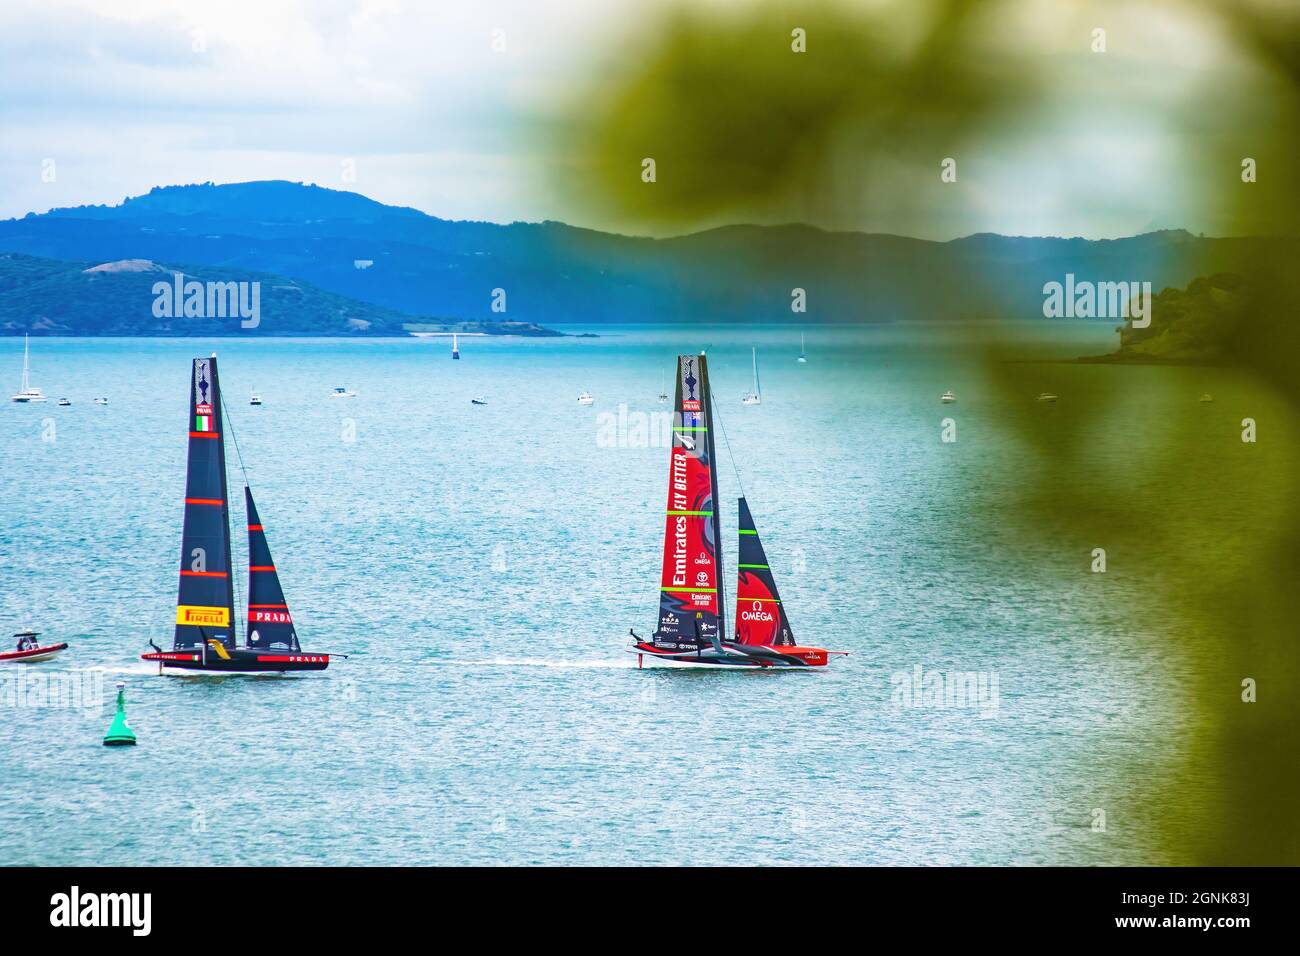 AUCKLAND, NEW ZEALAND - Mar 16, 2021: A scenic view Luna Rossa and Emirates Teamduring 36th Americas Cup in Auckland, New Zealand Stock Photo